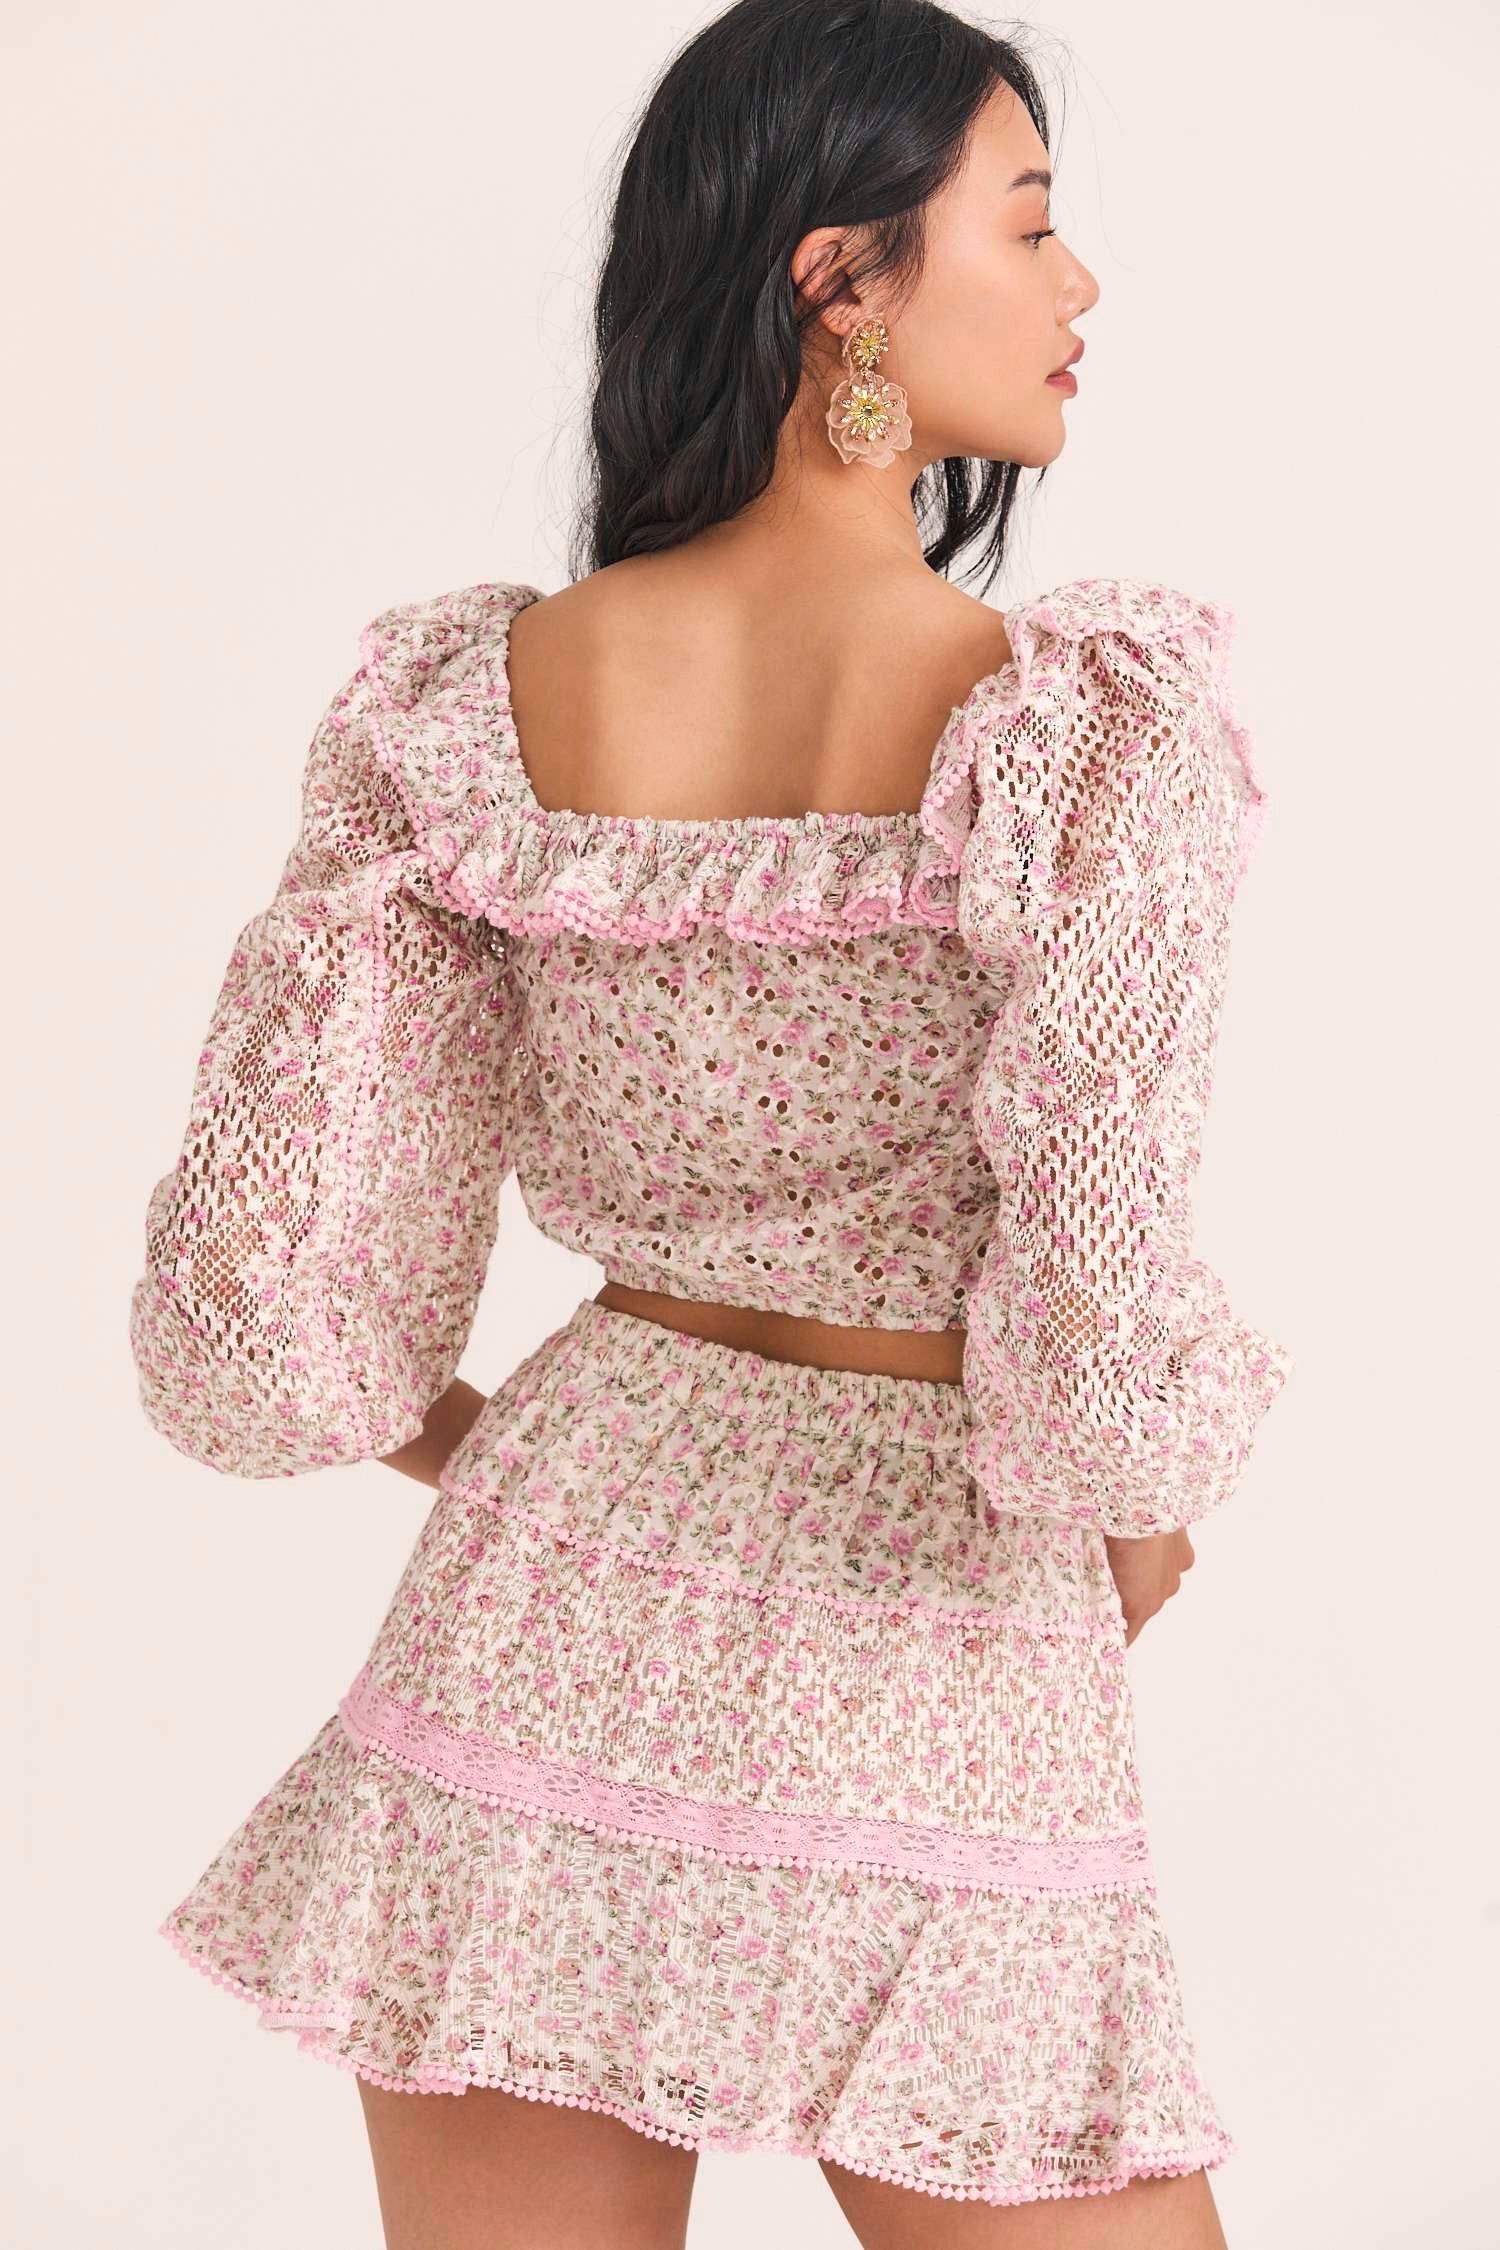 Women's three quarter sleeve cropped top with custom lace and eyelet fabrication, in a mixed micro floral print. 